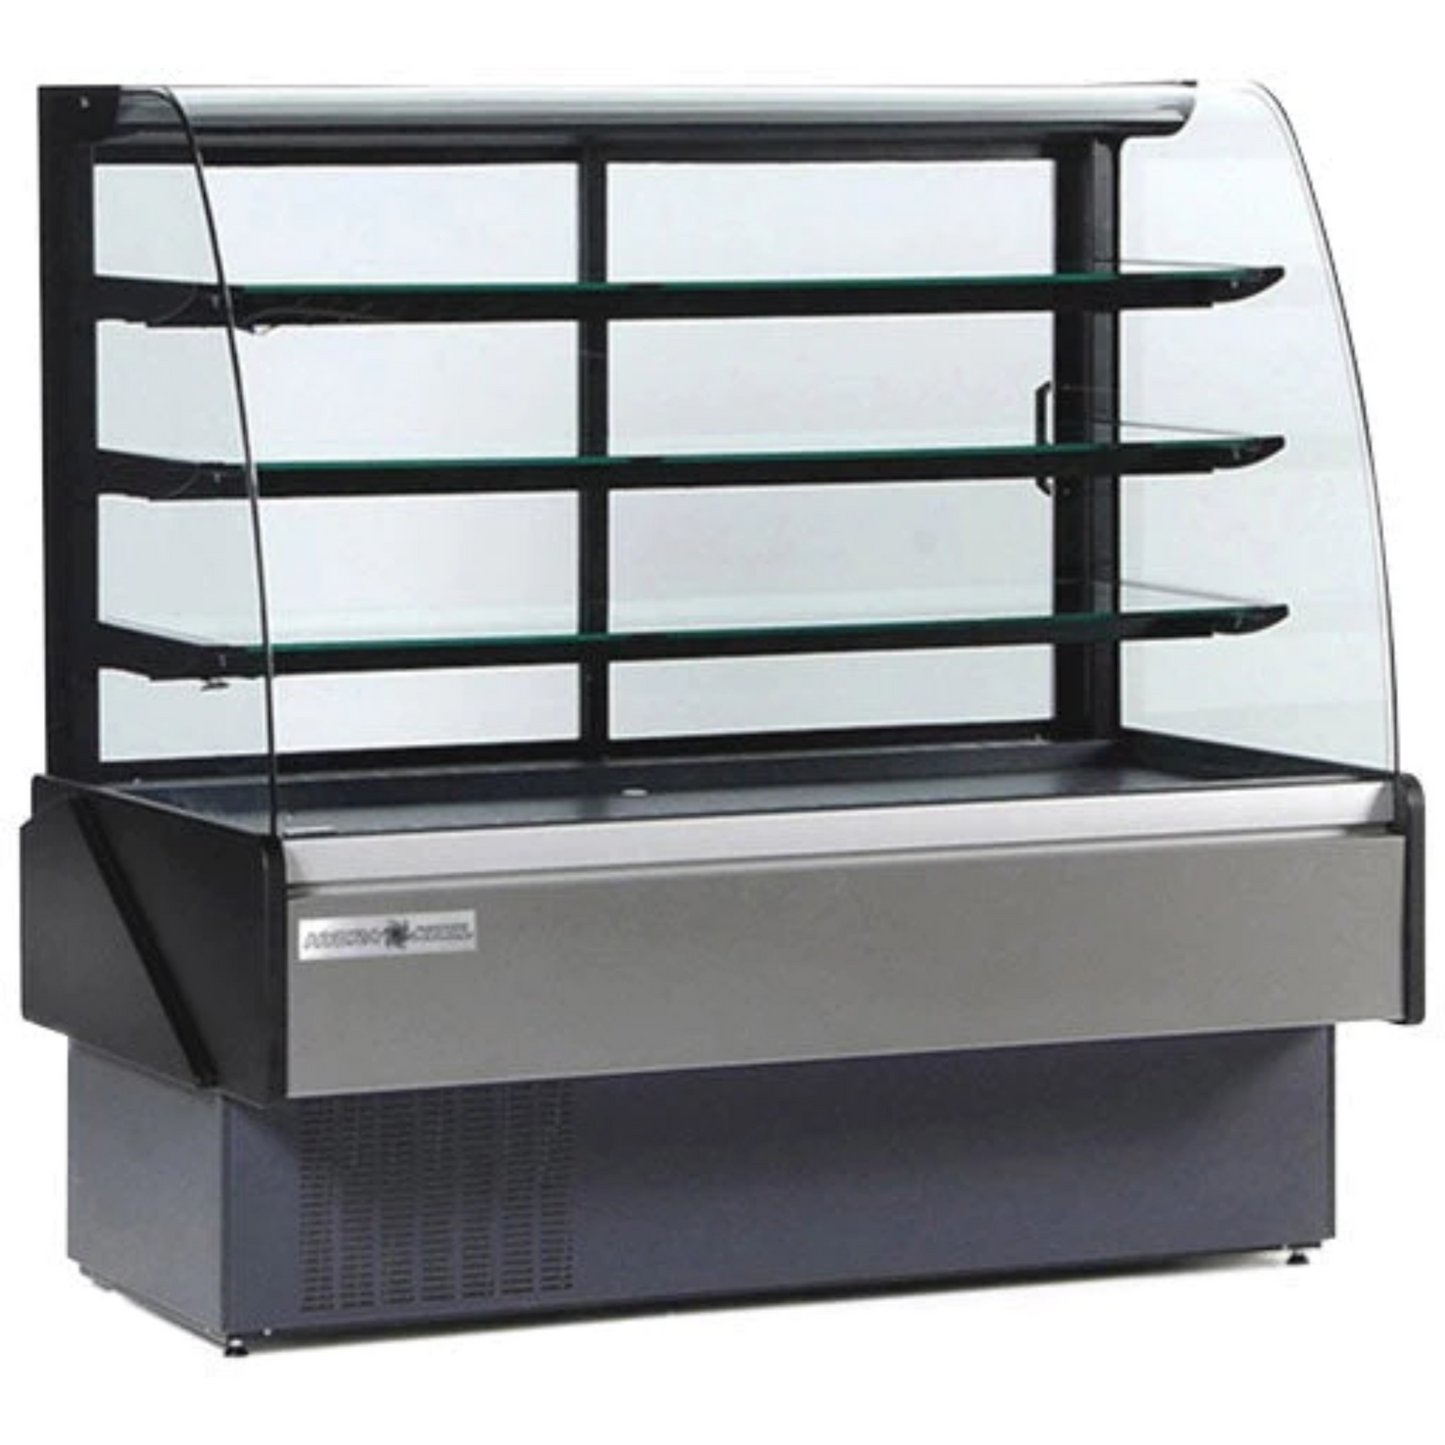 Hydra-Kool KBD-CG-80-S 80" Curved Glass Bakery Deli Case Self-Contained